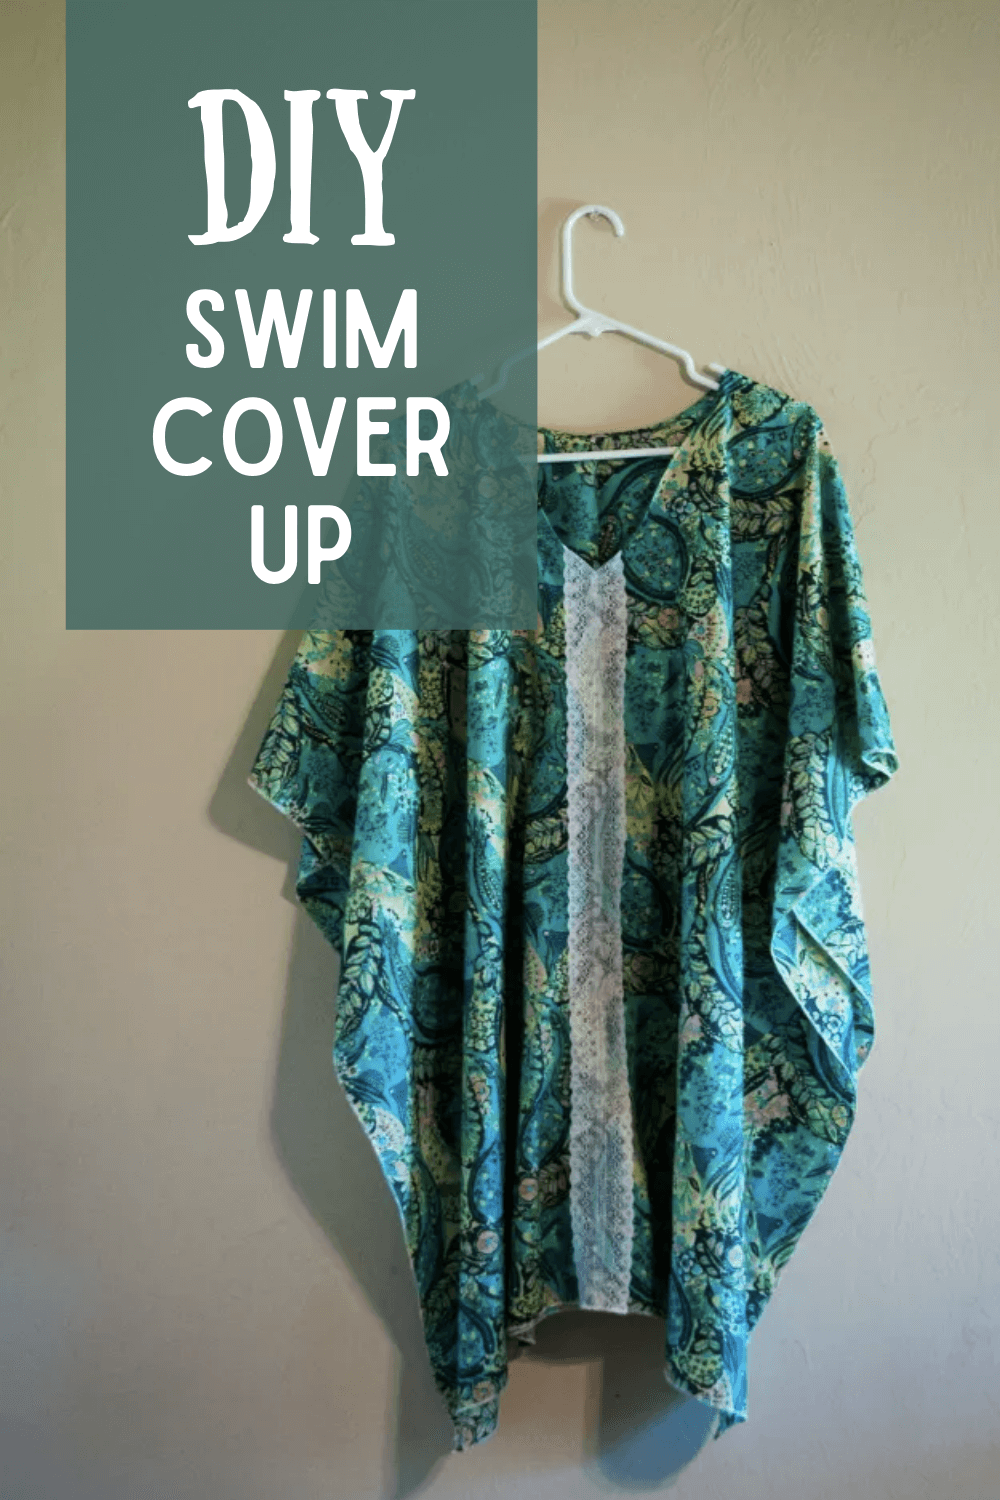 DIY Swim Cover Up Ideas for Women and Girls